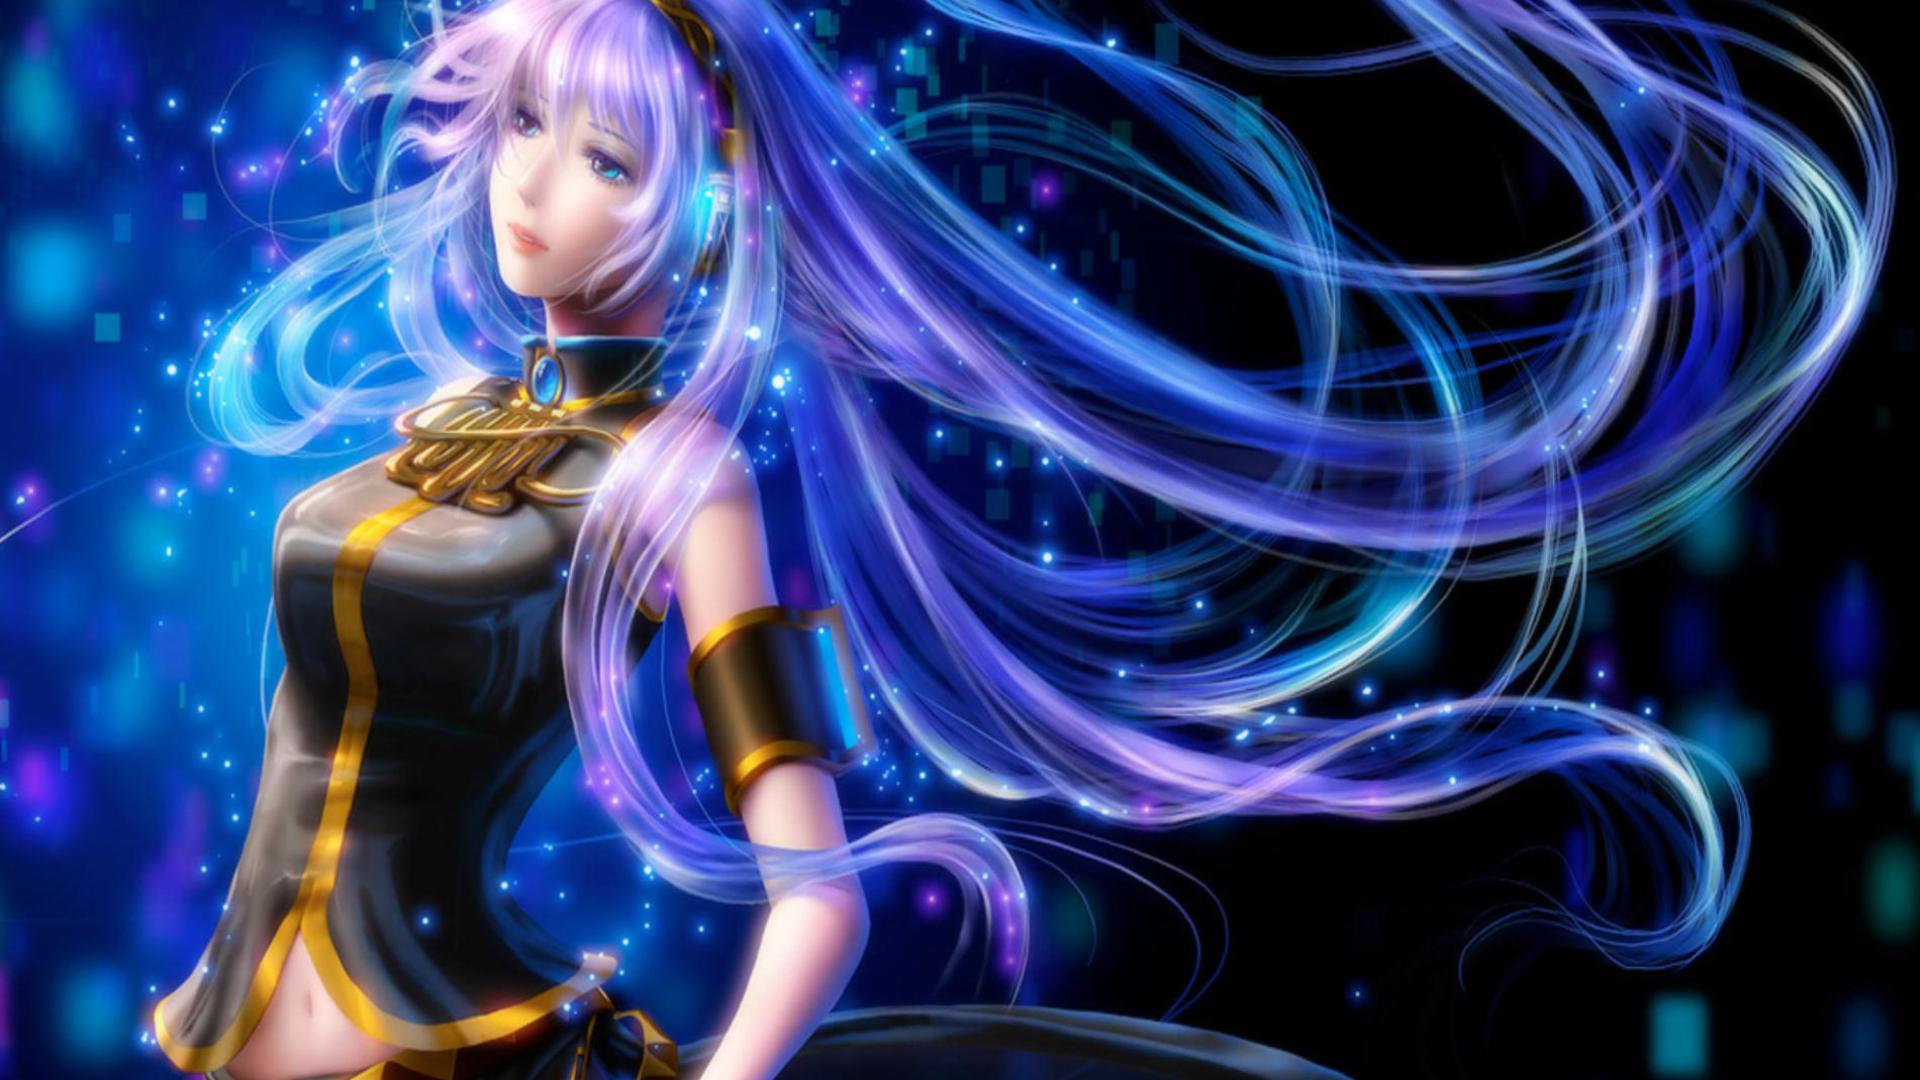 Vocaloid HD Wallpaper  Background Image  1920x1080  ID:107967  Wallpaper Abyss